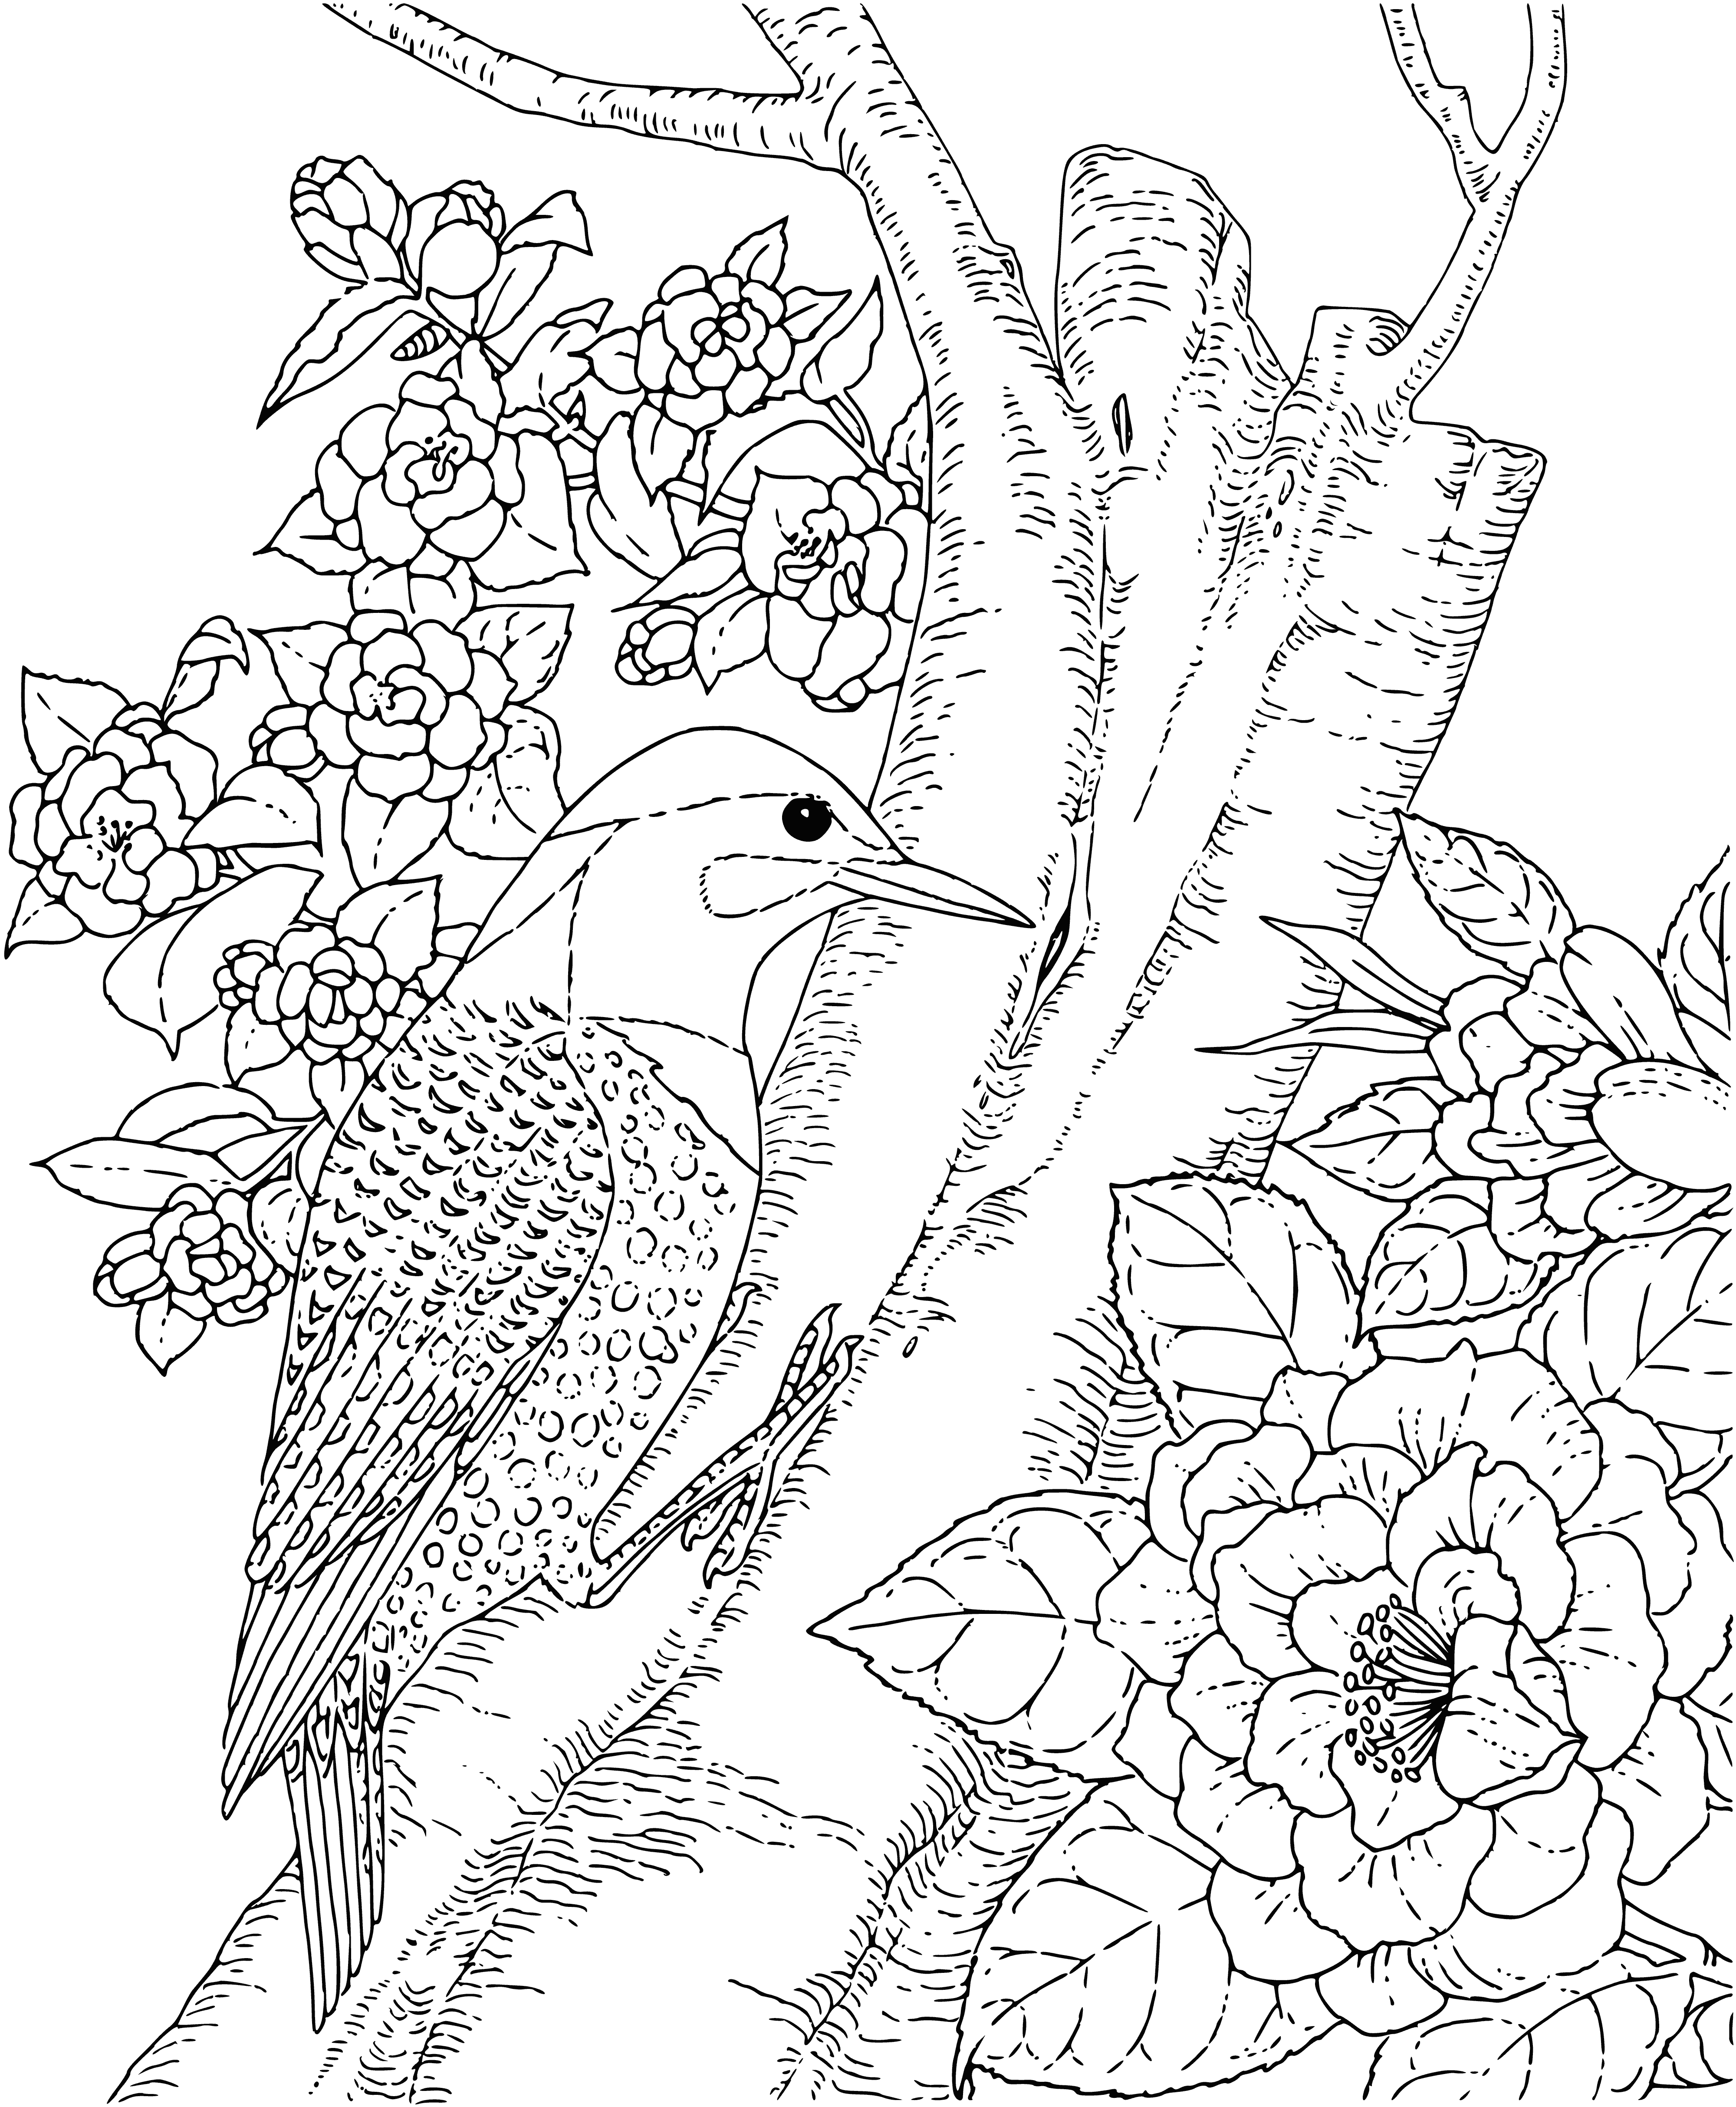 coloring page: A large woodpecker with a red head and a long, pointed tail. Uses a long, sharp beak to peck for food in tree bark.